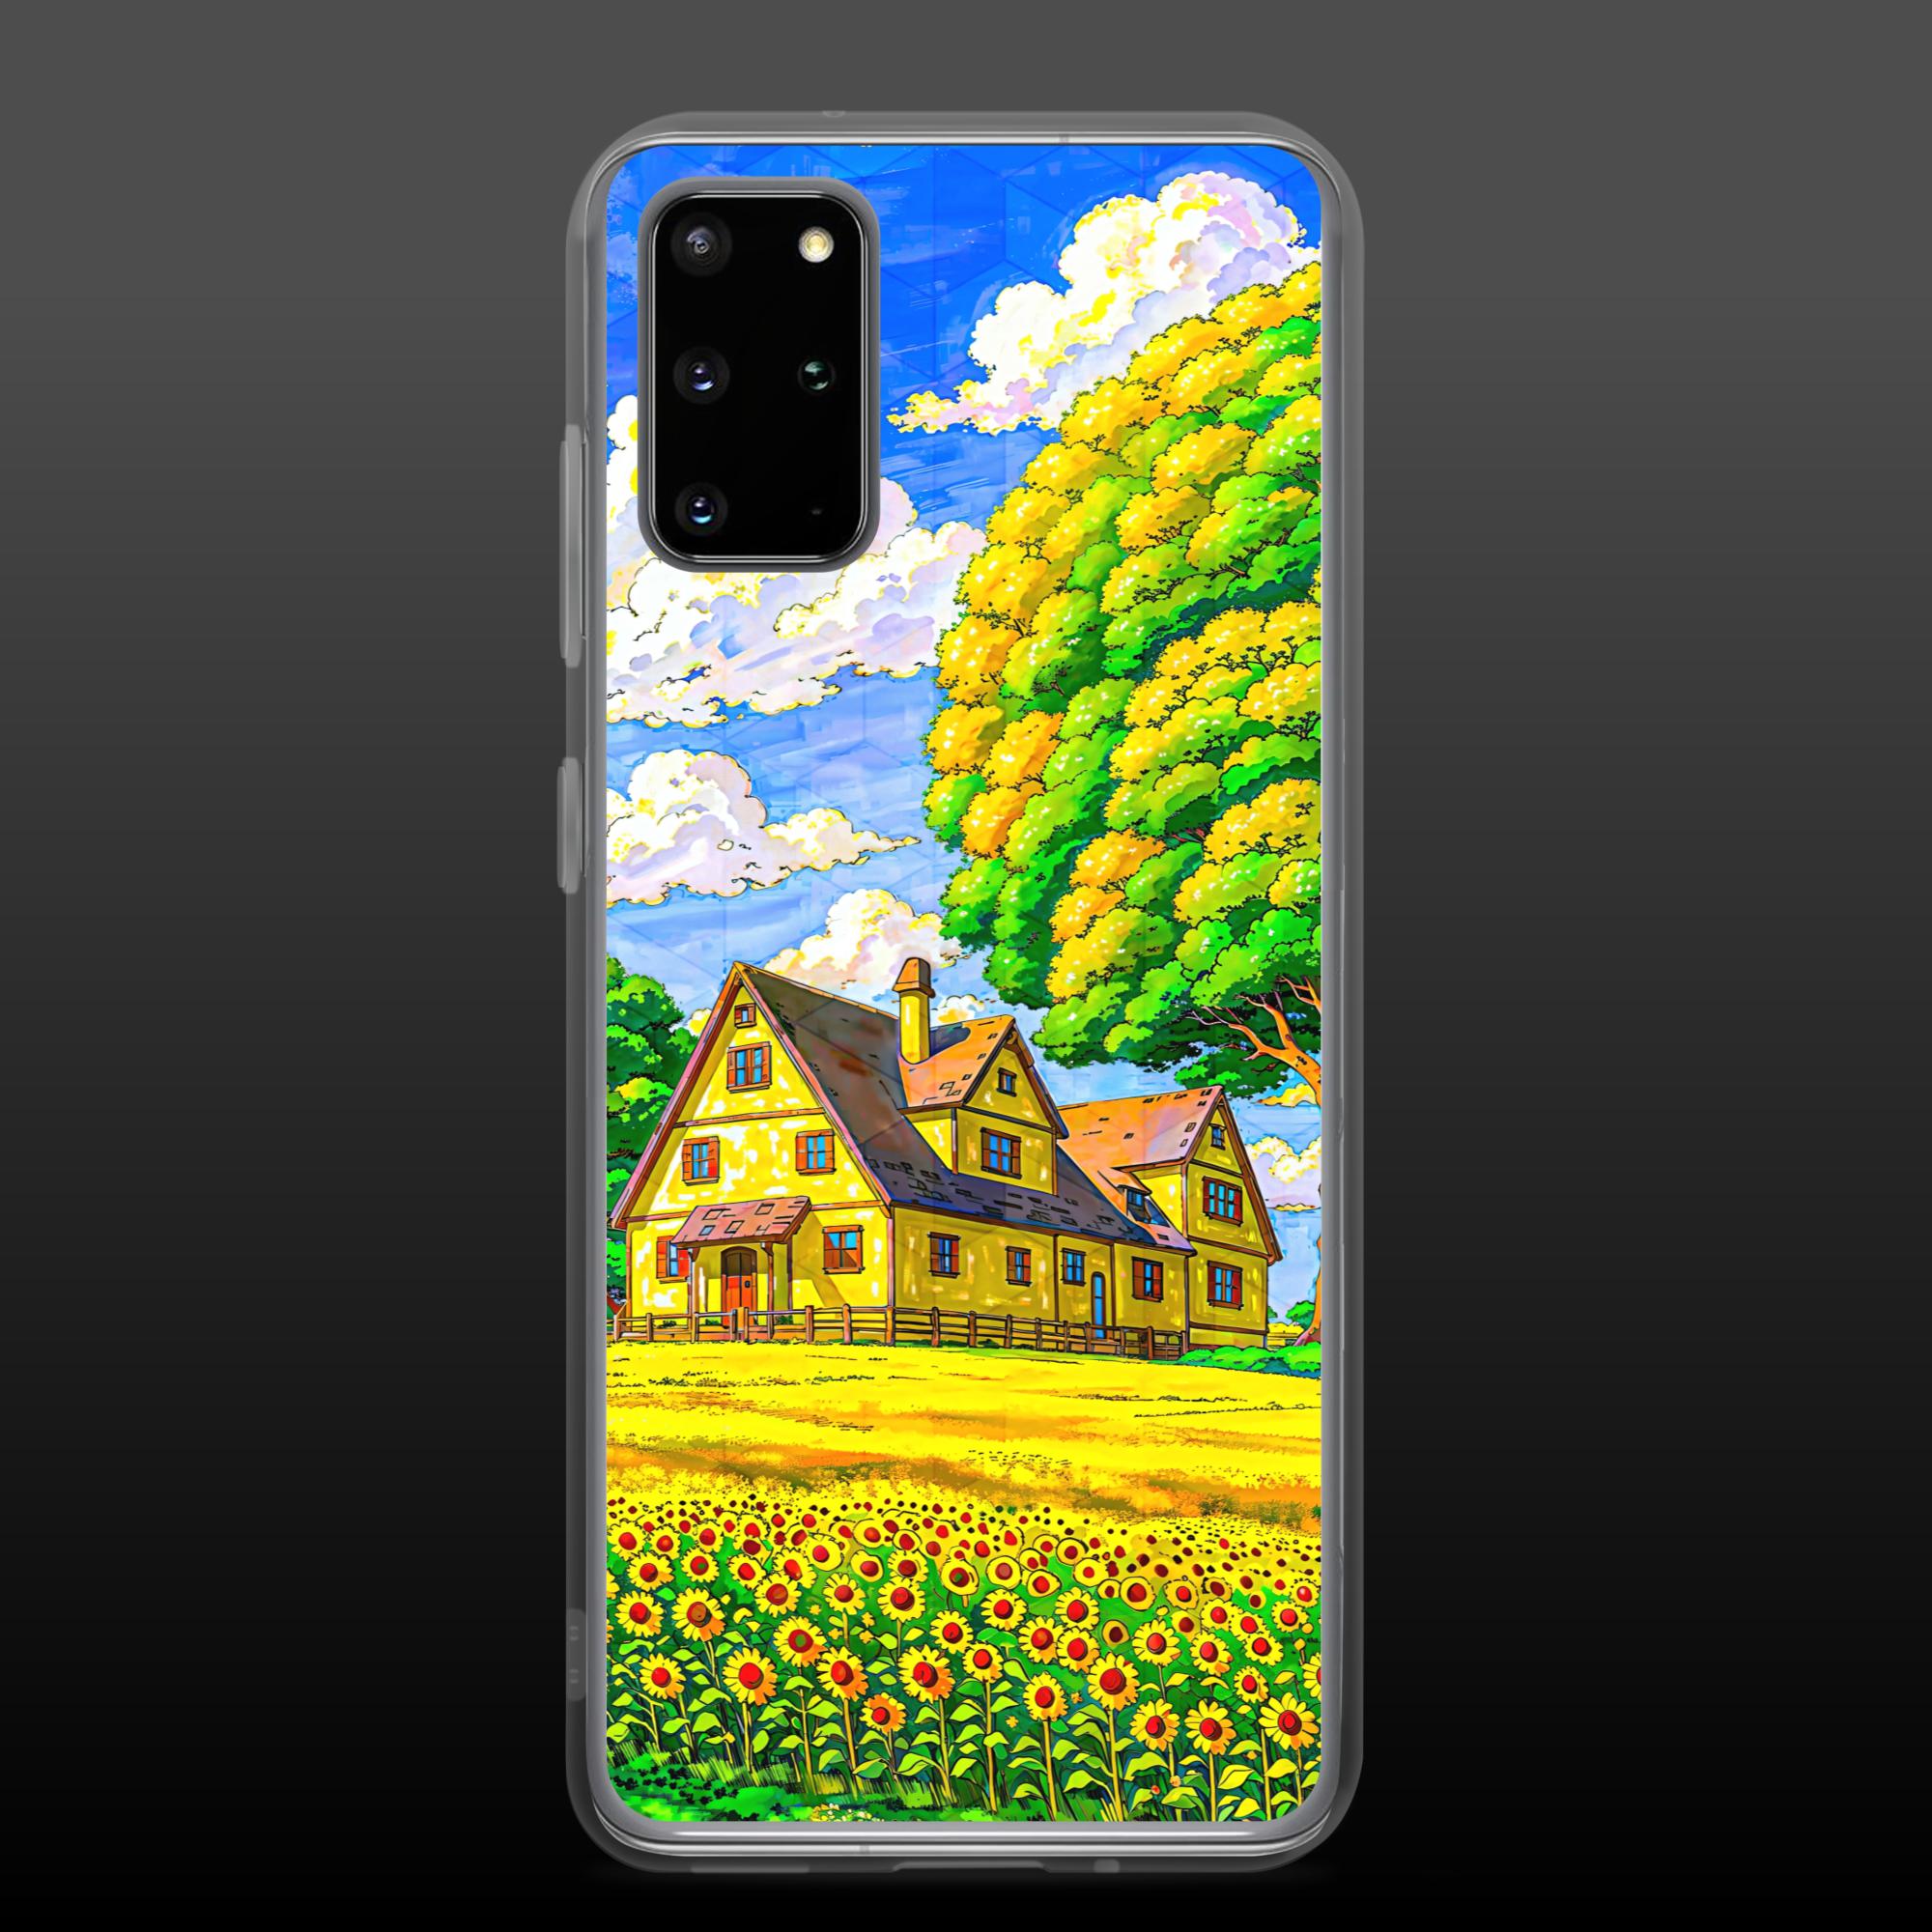 "Summertime reality" clear samsung case - Clear samsung case - Ever colorful